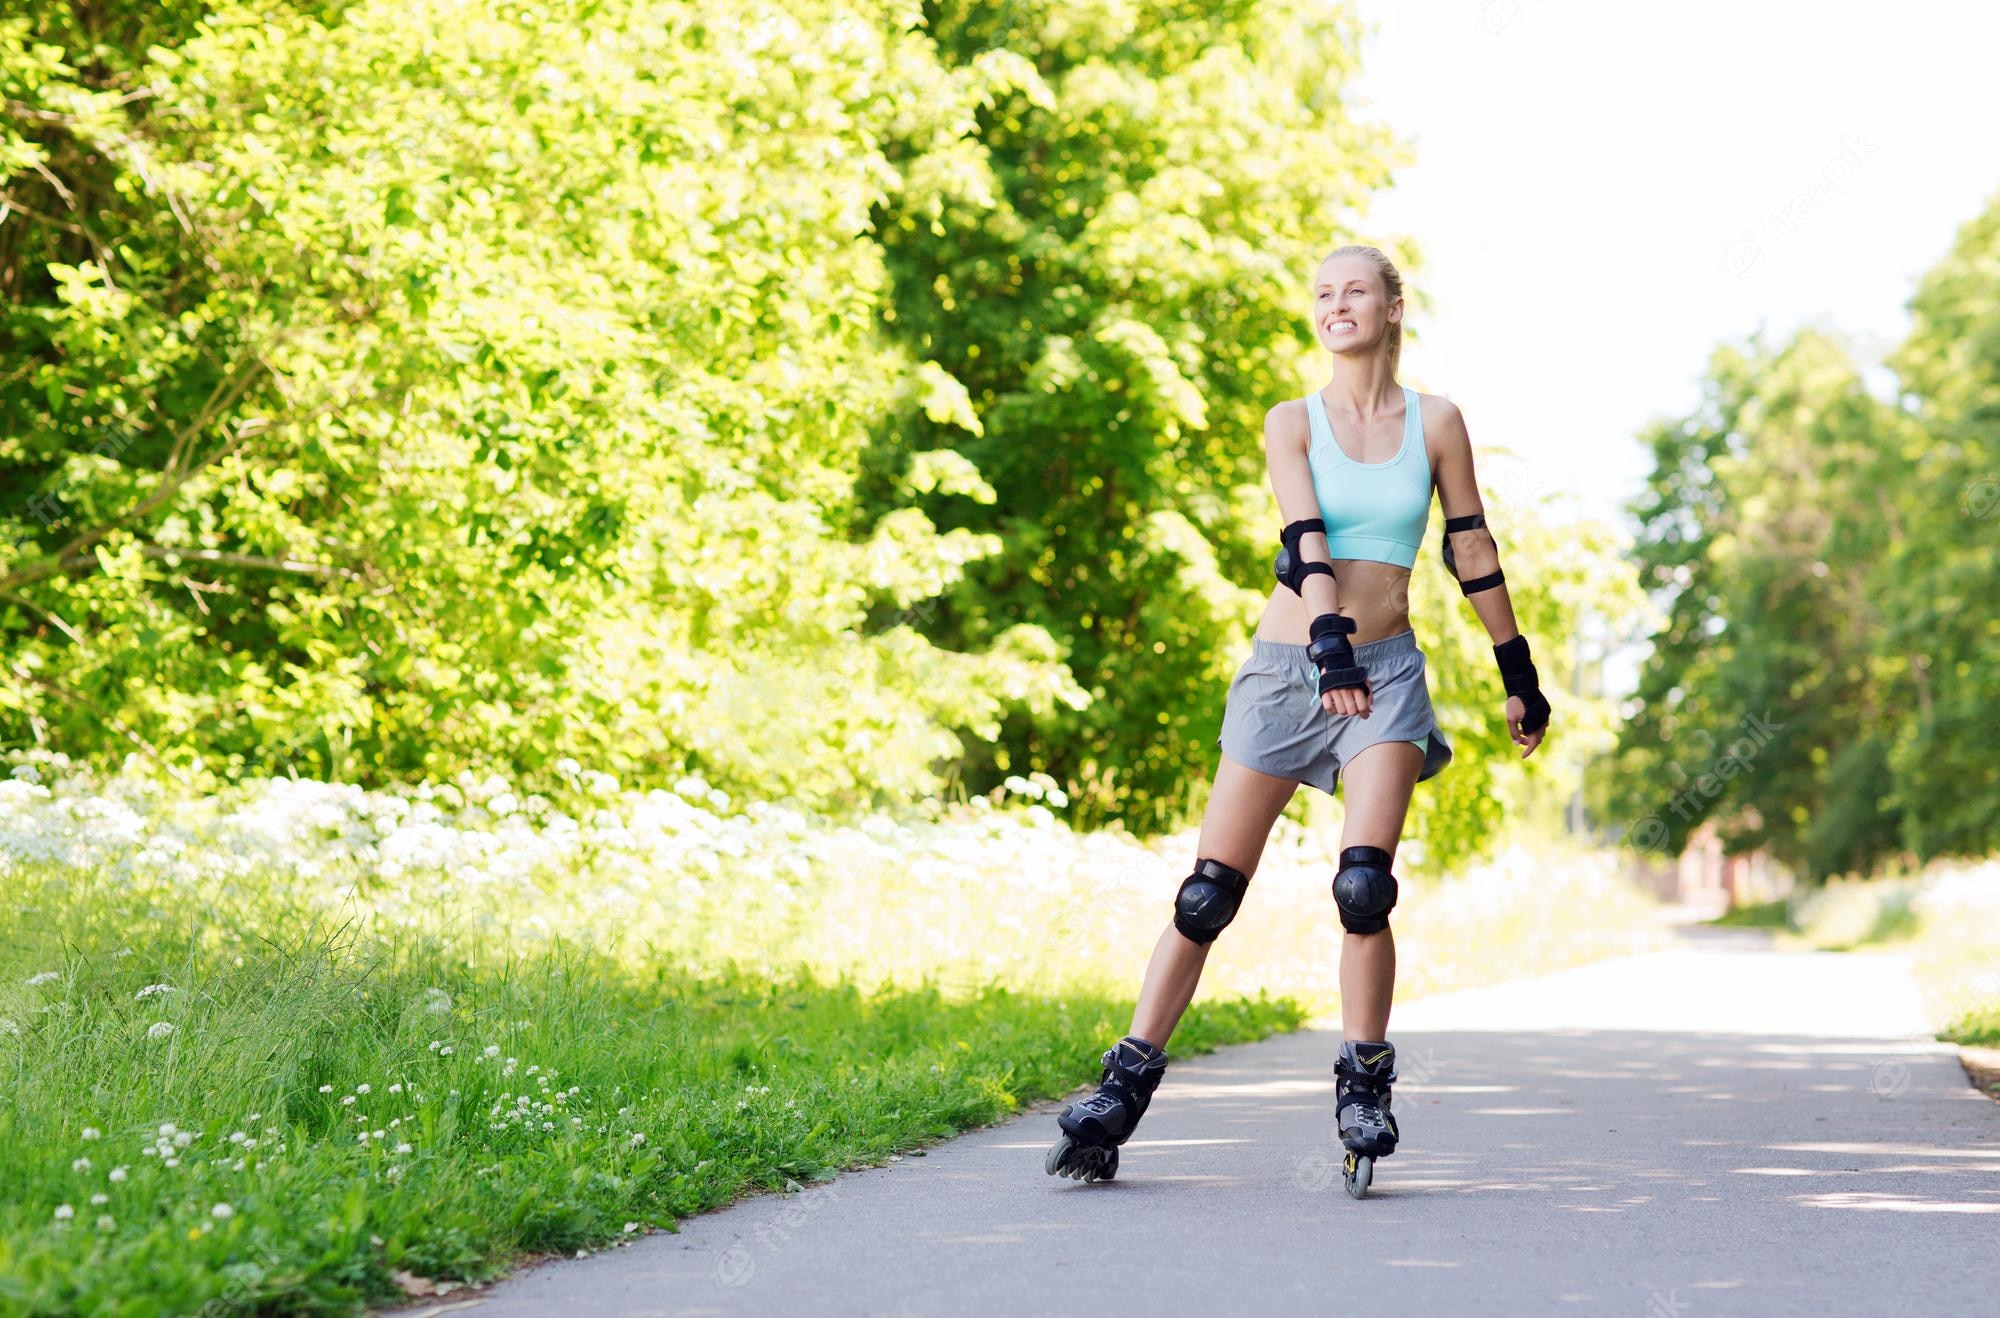 fitness sport summer rollerblading healthy lifestyle concept happy young woman rollerblades protective gear riding outdoors 380164 112871